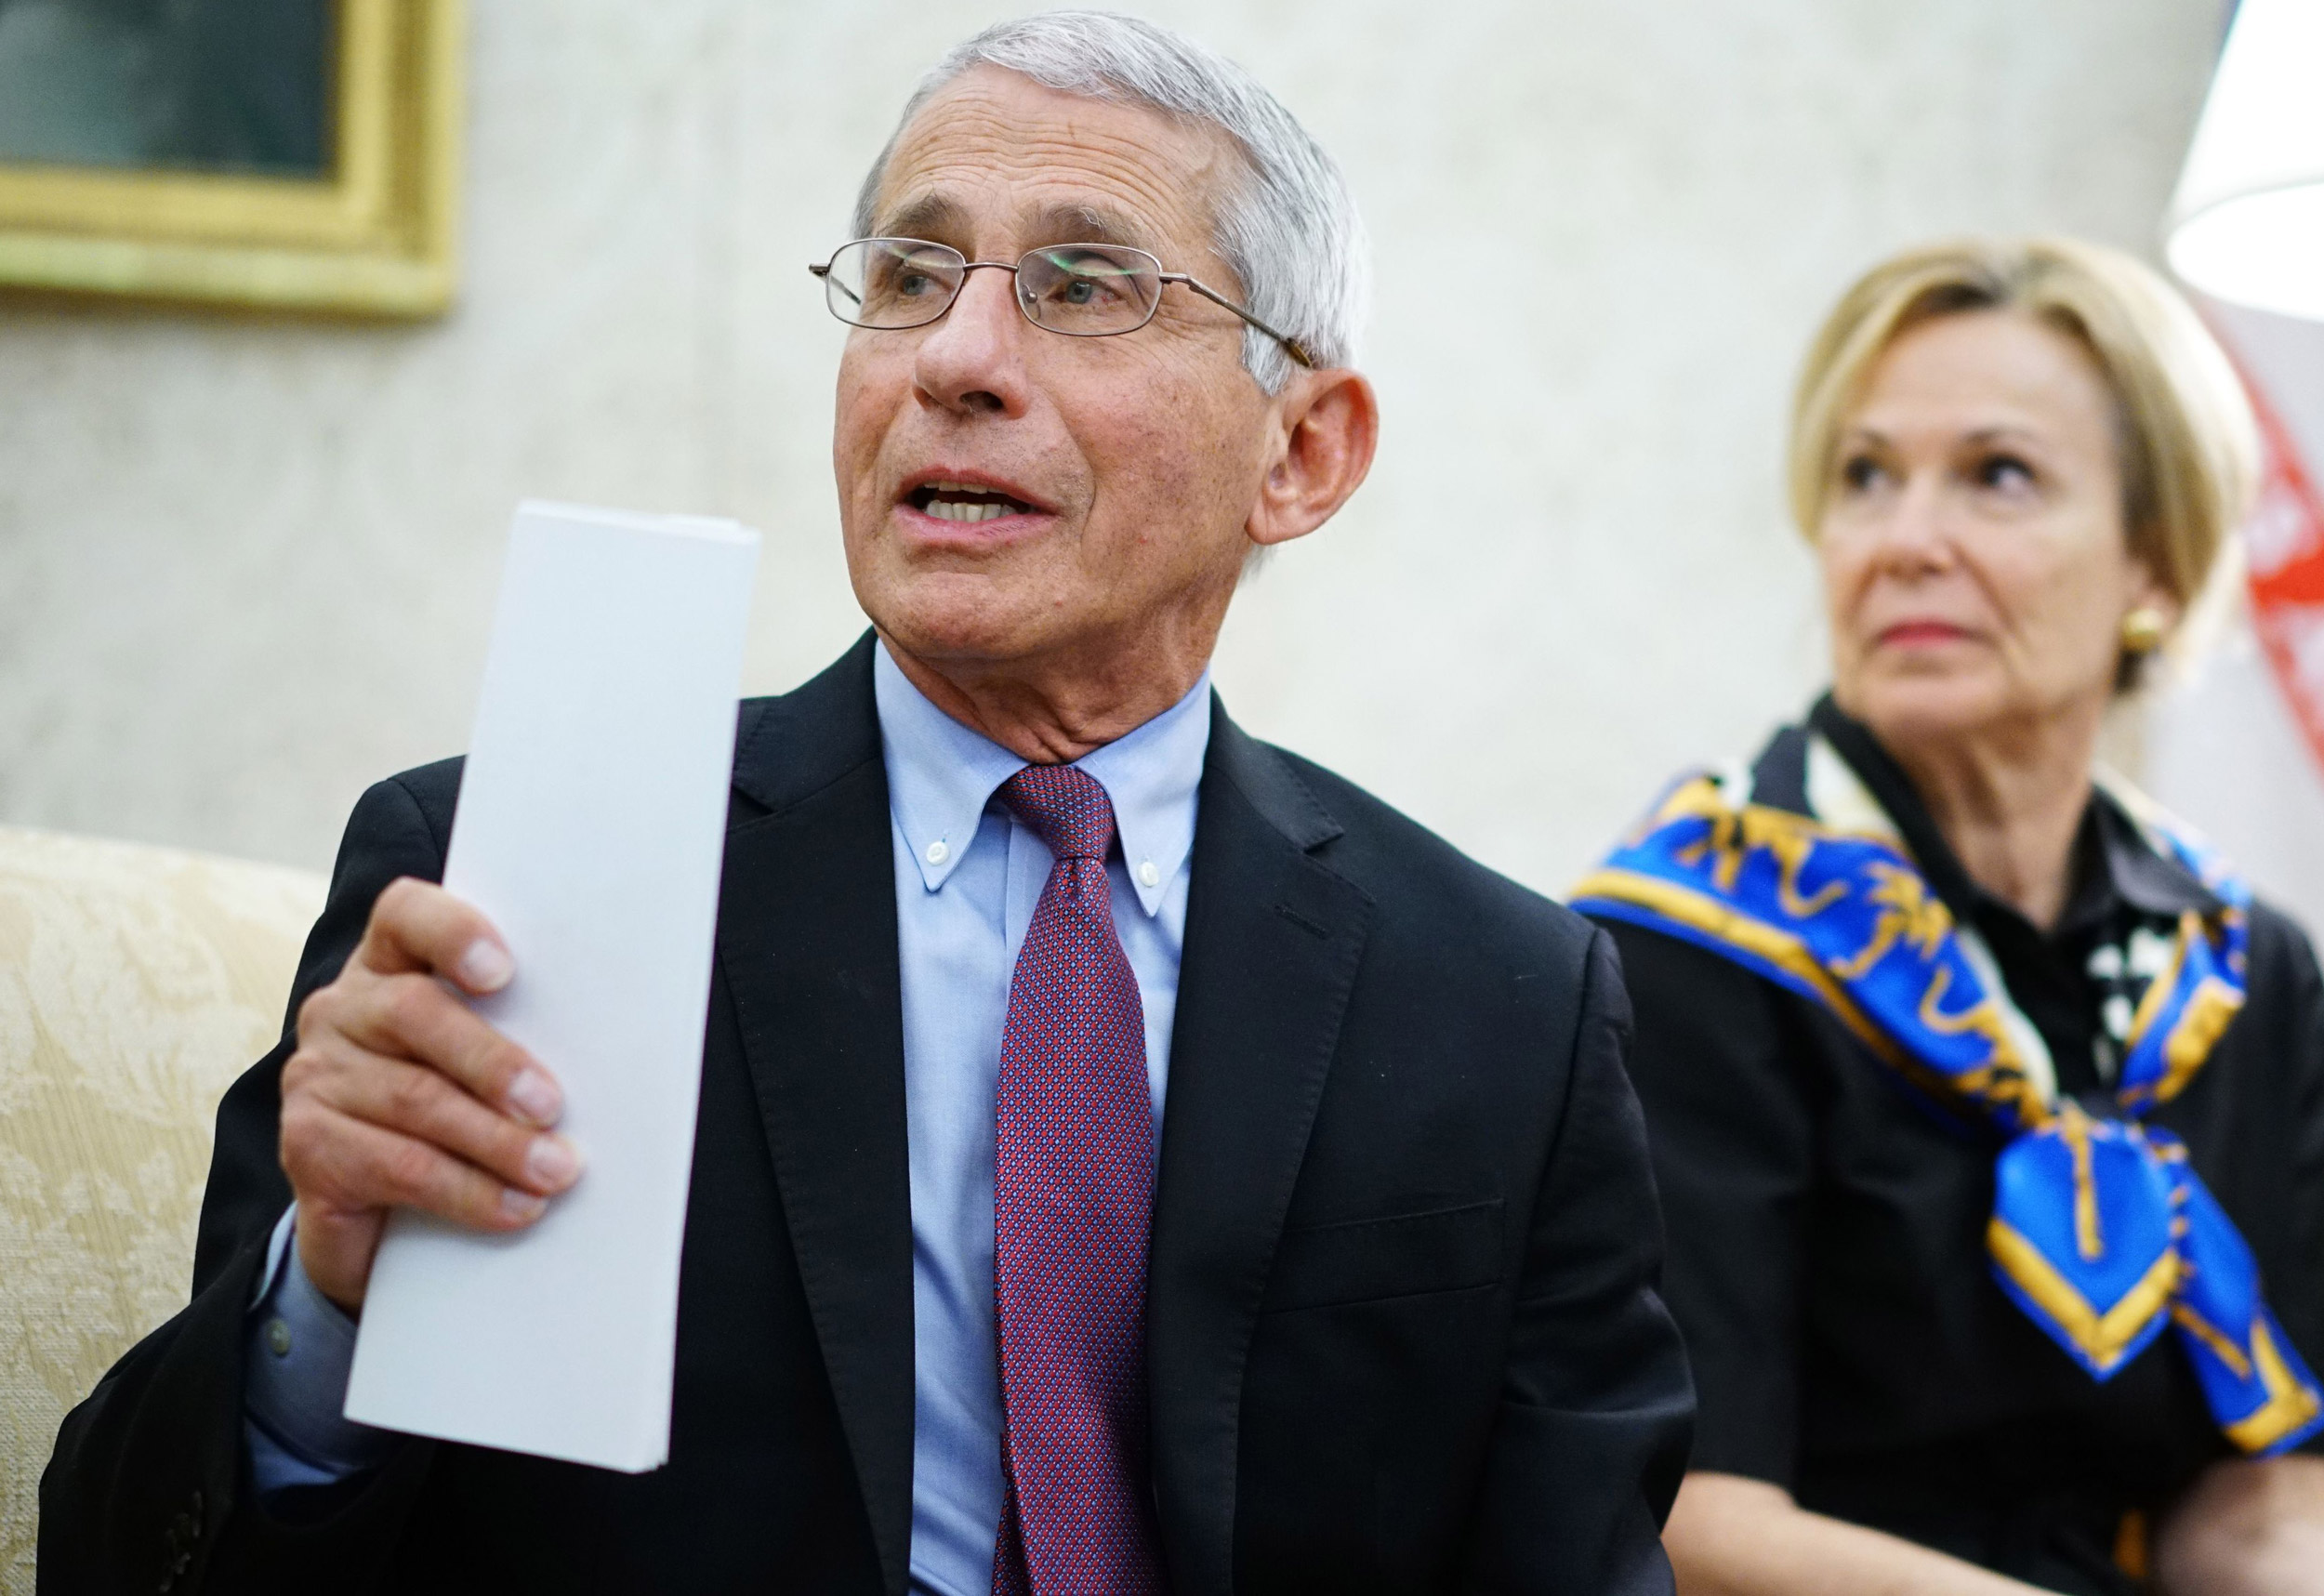 Dr. Anthony Fauci, left, director of the National Institute of Allergy and Infectious Diseases speaks during a meeting in the Oval Office of the White House in Washington on April 29.